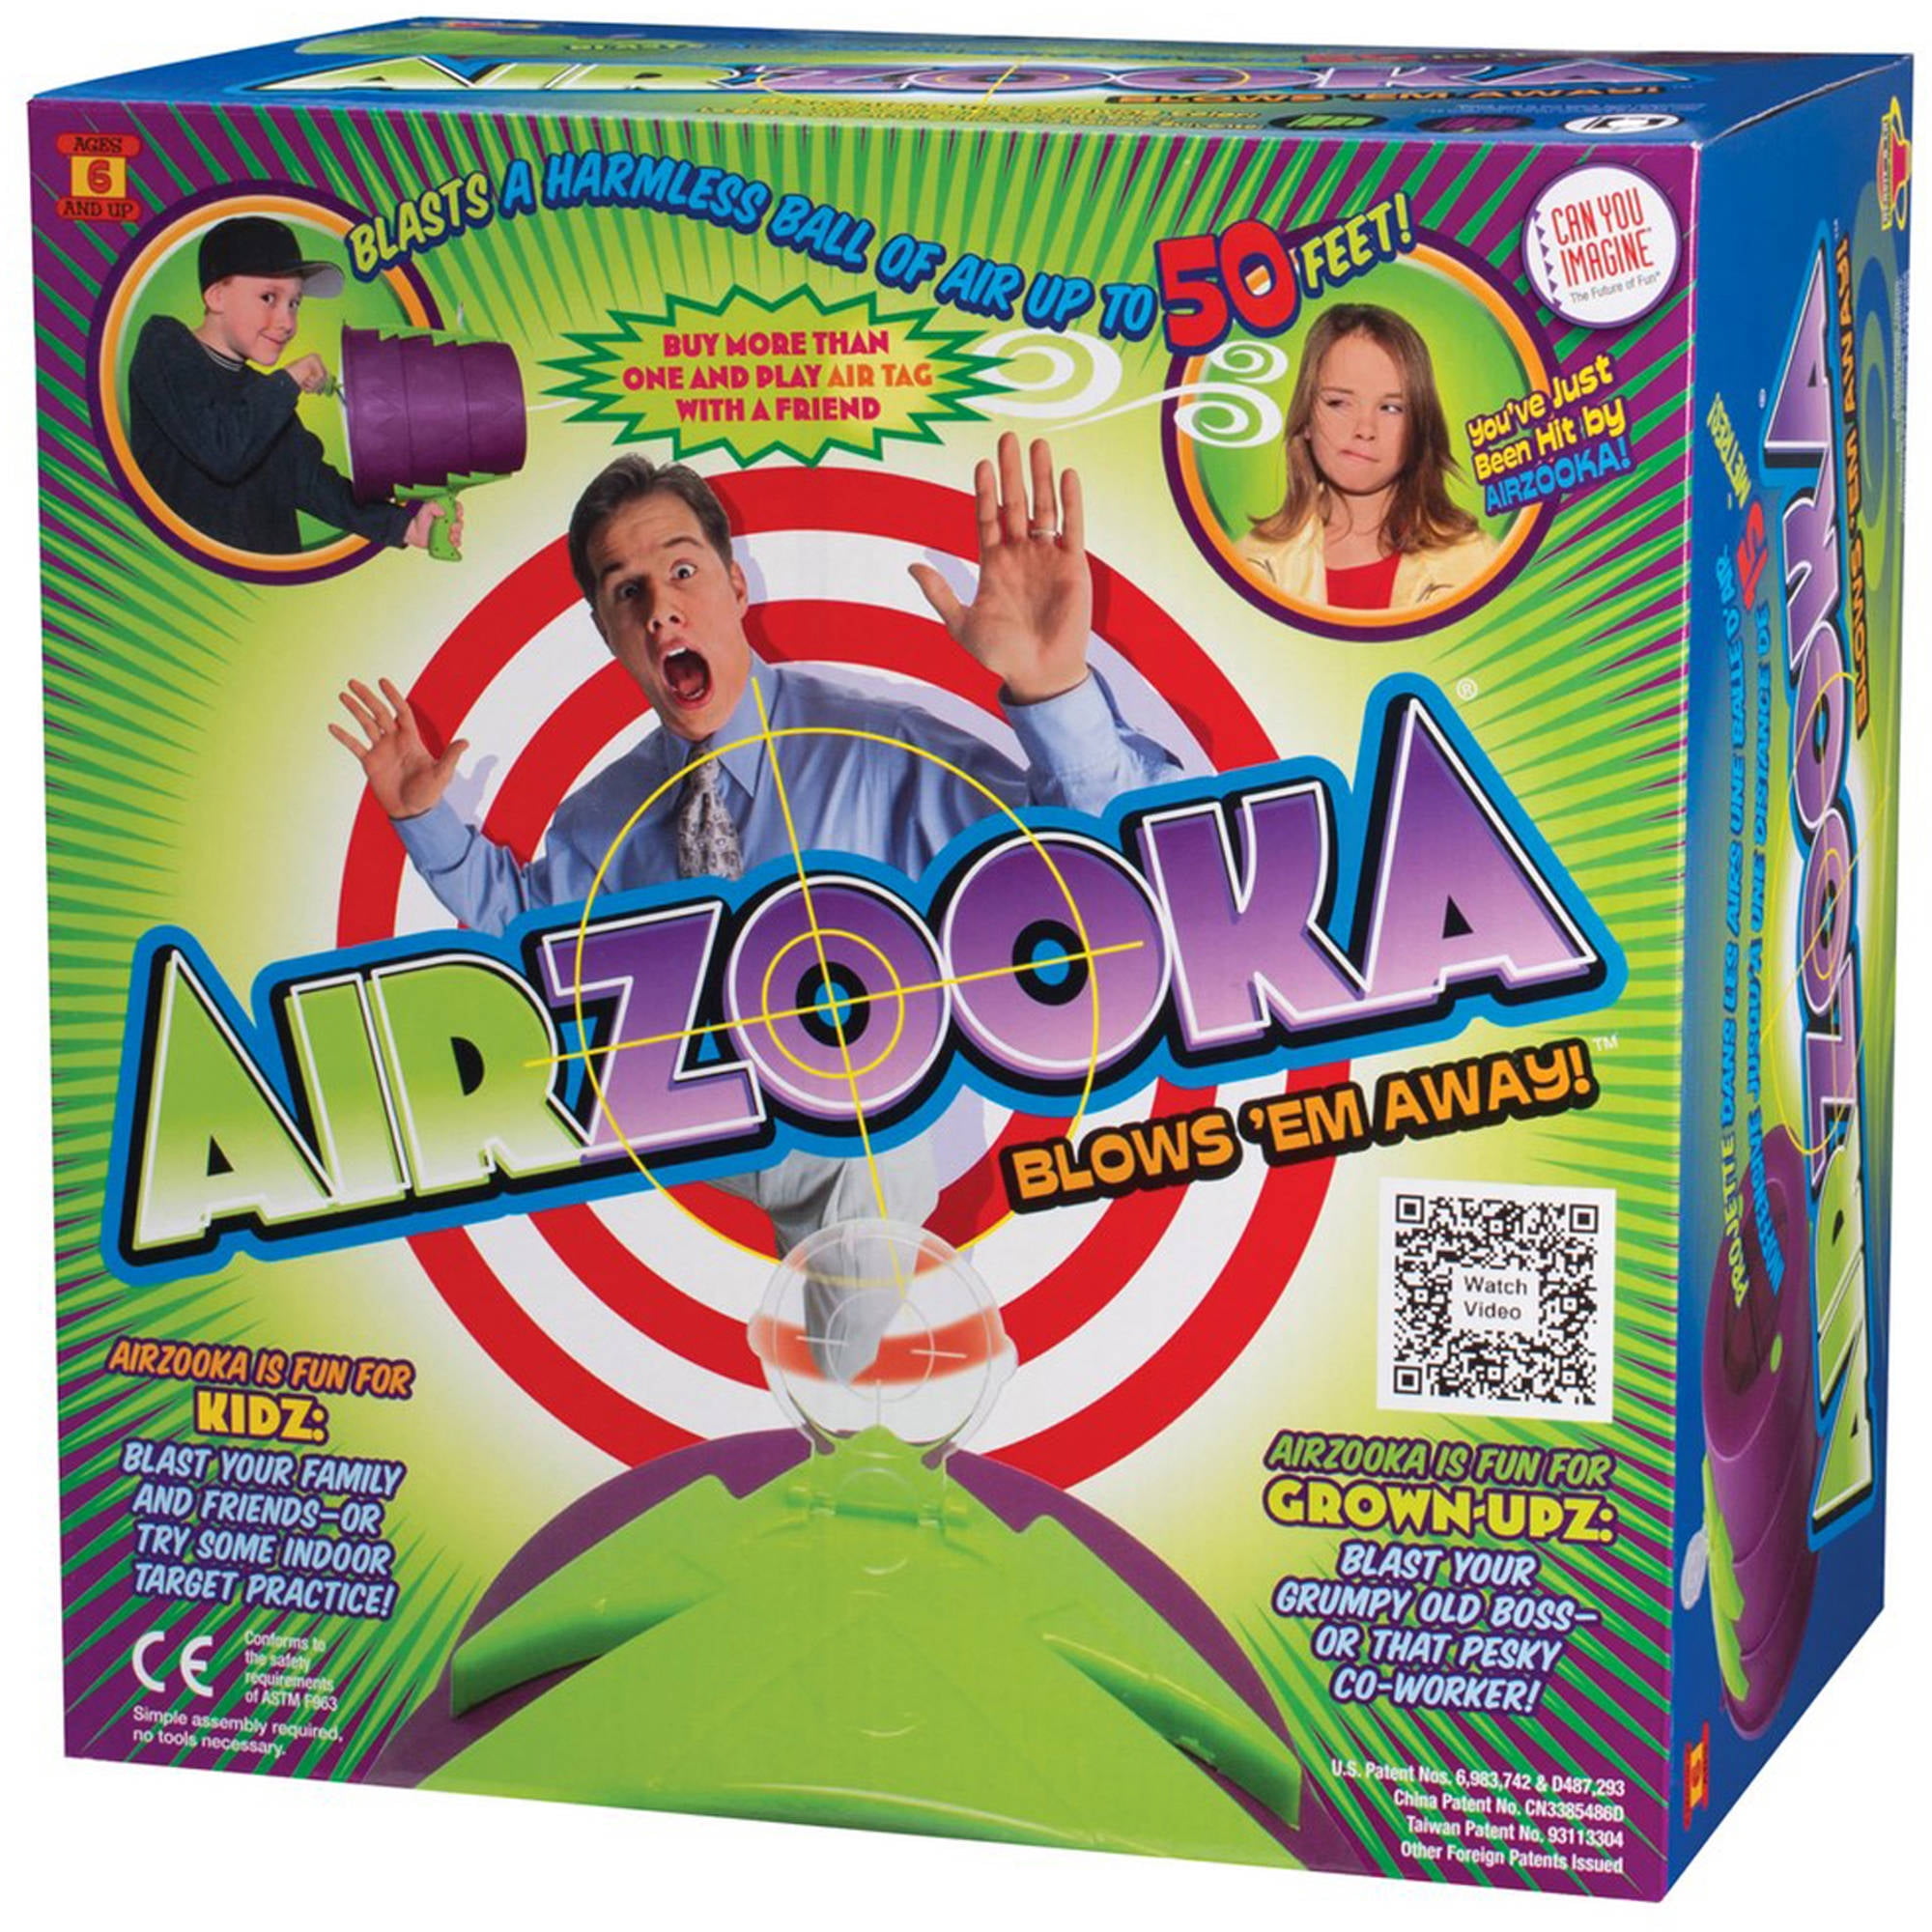 Airzooka Bazooka Blaster Airzooka Launcher Kids Toy  Air Cannon Shooter Pink 